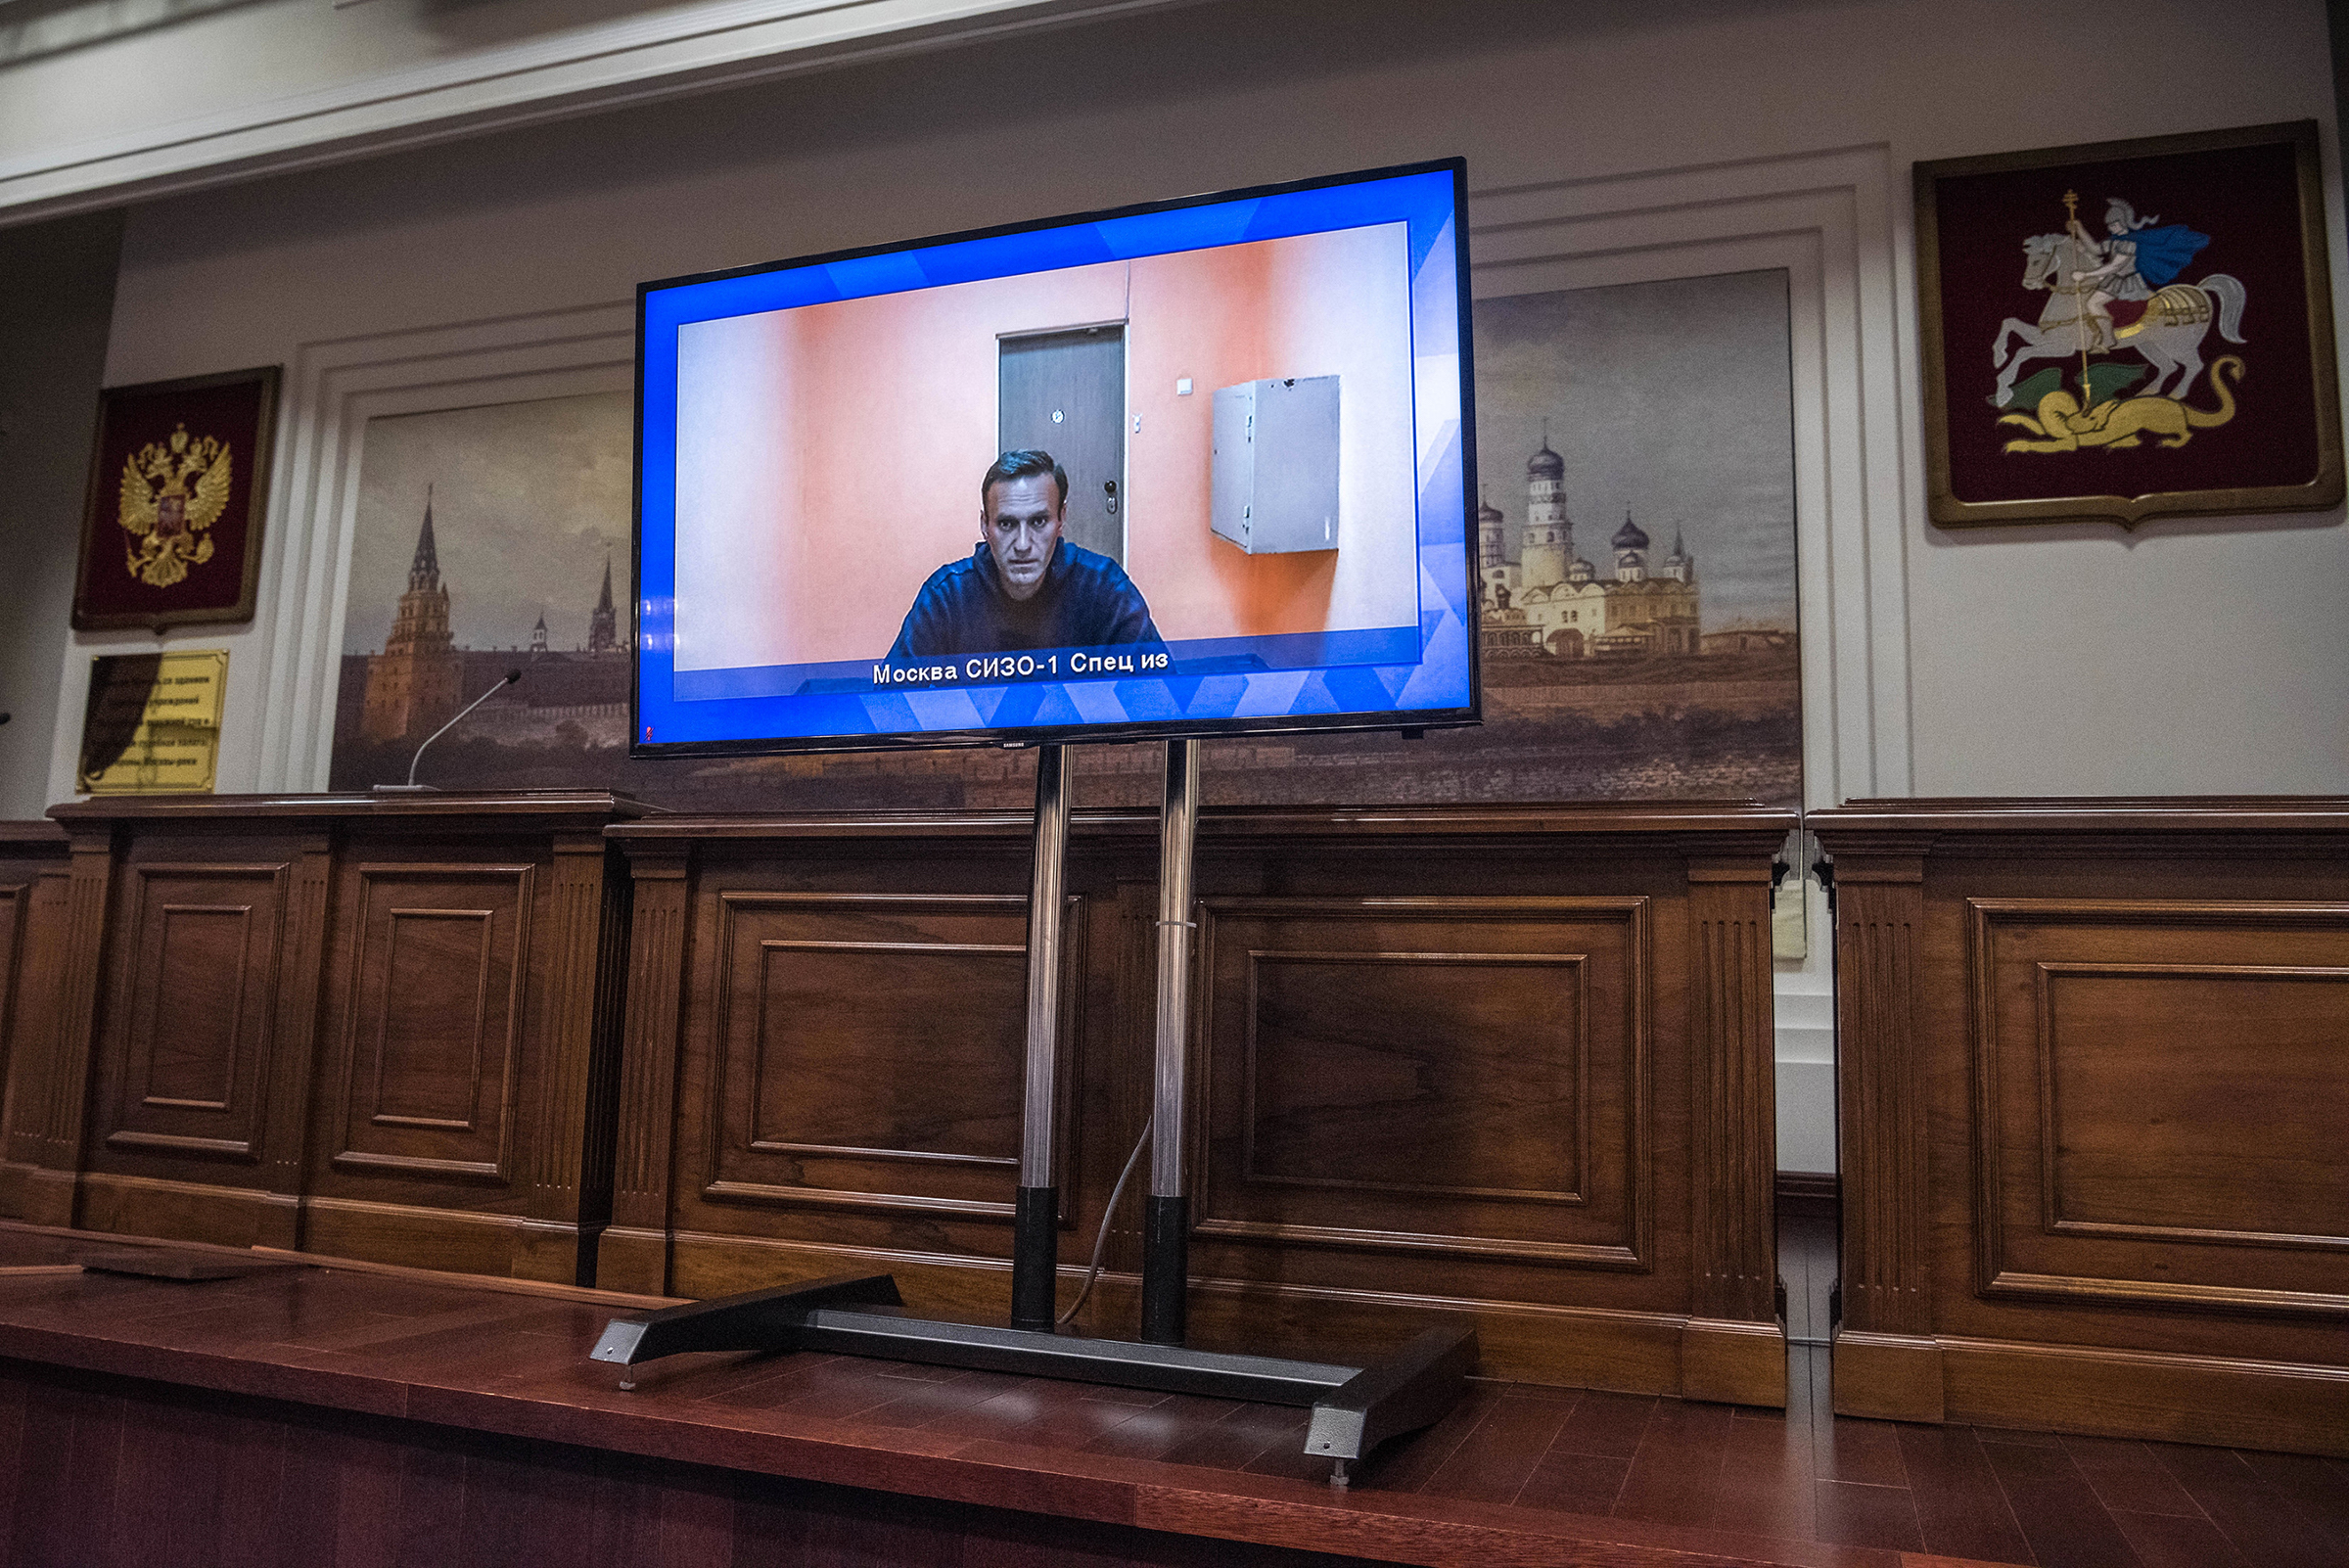 Russian opposition leader Alexei Navalny appears via video conference for a Moscow court hearing on Jan. 28, during which it was directed that he remain imprisoned following his arrival back in Russia from Germany, where he had been recuperating following a poisoning that nearly killed him. Navalny—who on Feb. 2 was sentenced to two years and eight months in prison—has become a rallying point for many grievances about Vladimir Putin’s 20-year reign.